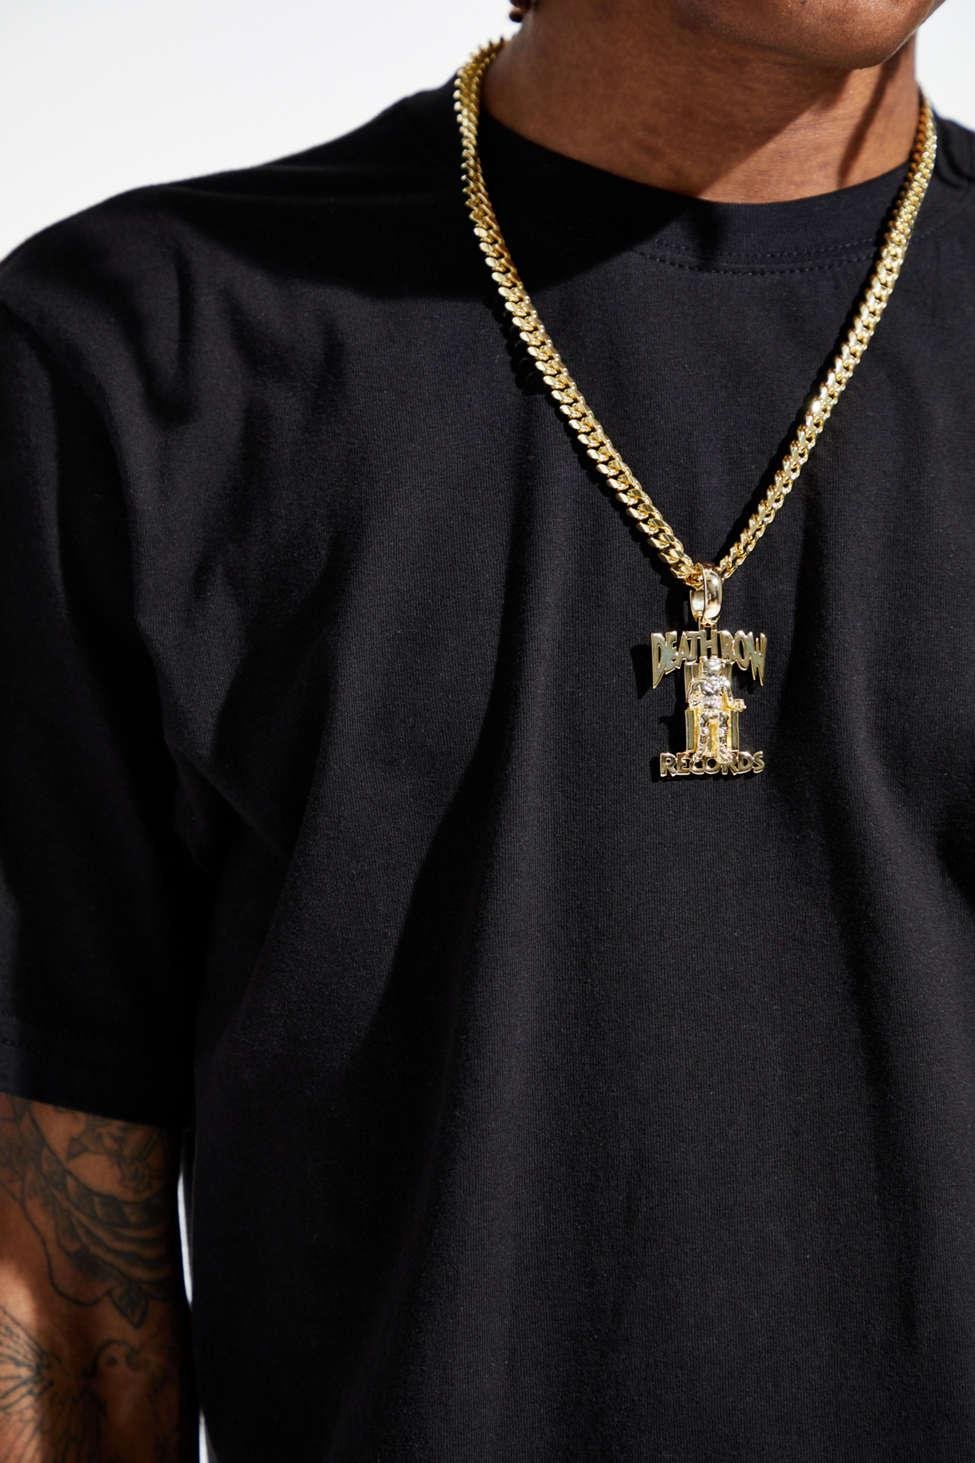 Urban Outfitters King Ice X Death Row Records Necklace for Men - Lyst